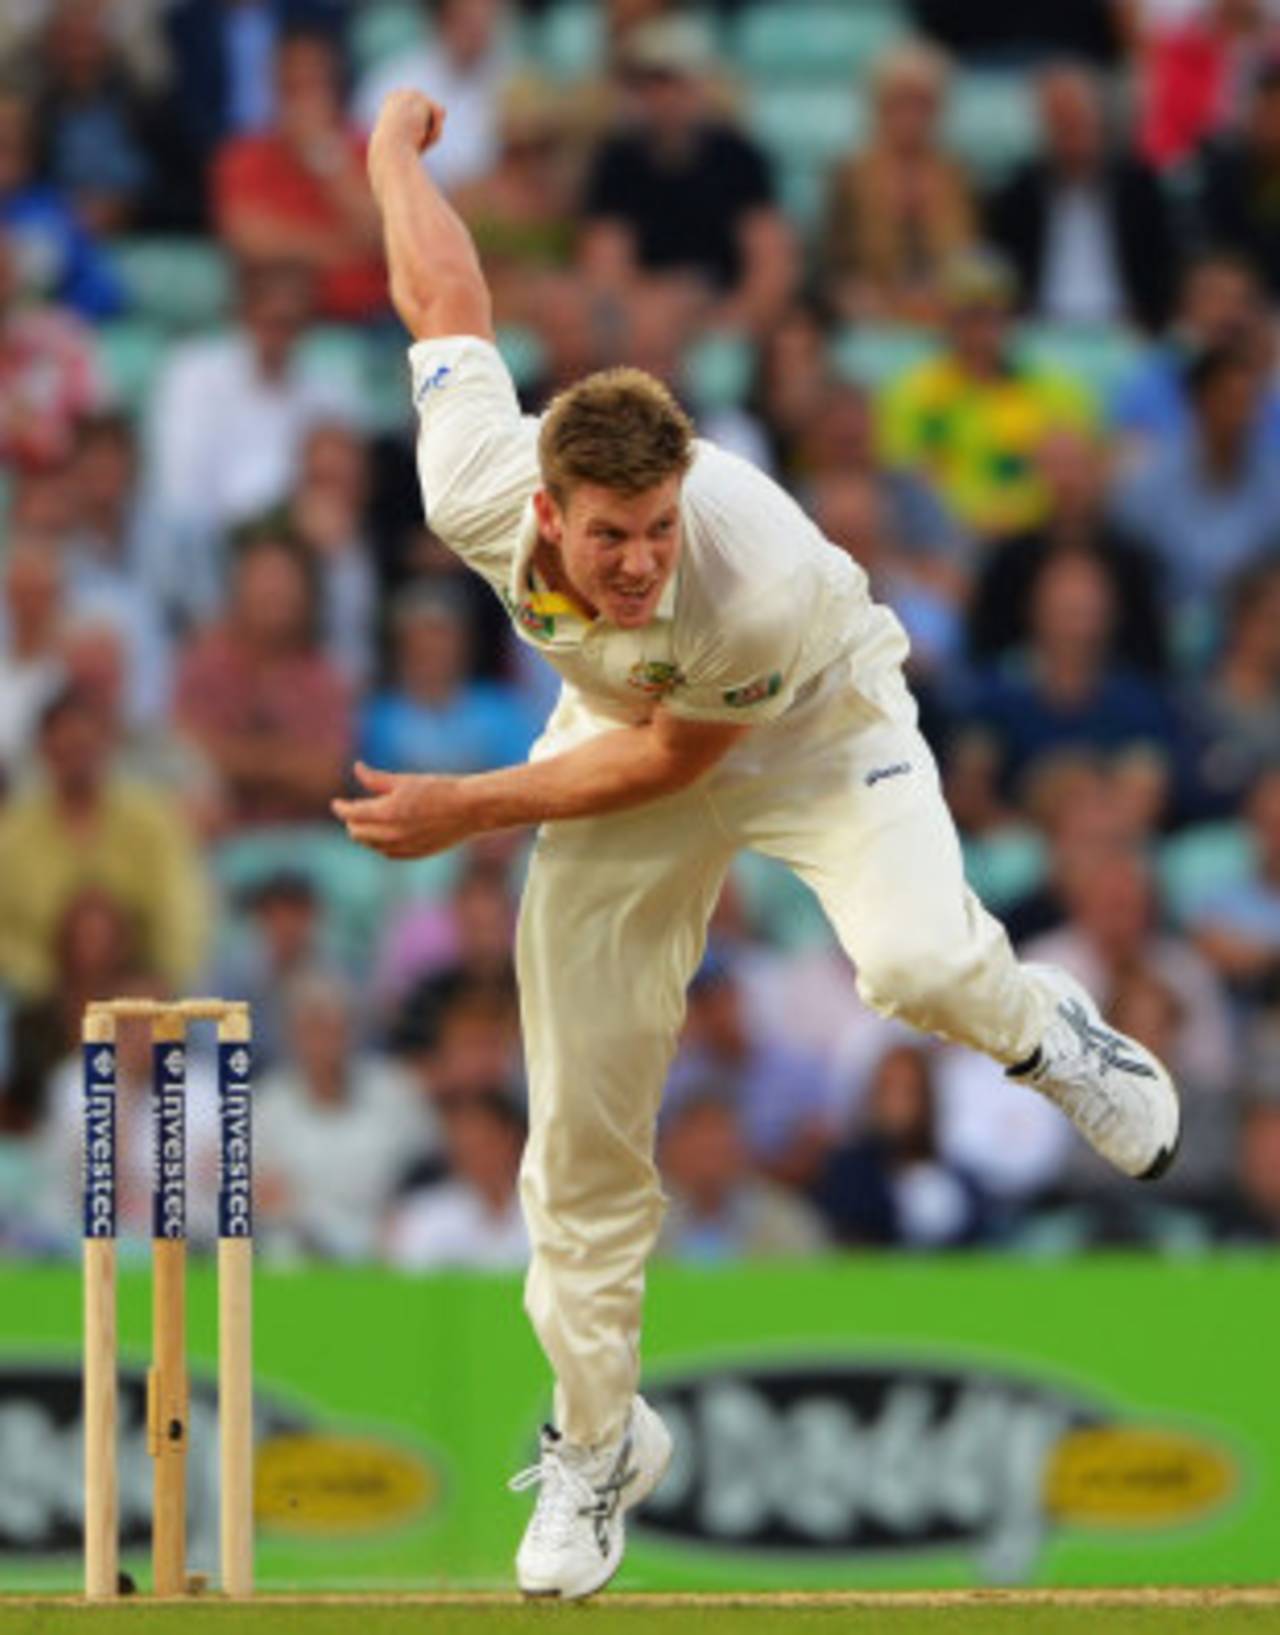 James Faulkner sent down his first overs in Test cricket, England v Australia, 5th Investec Test, The Oval, 2nd day, August 22, 2013